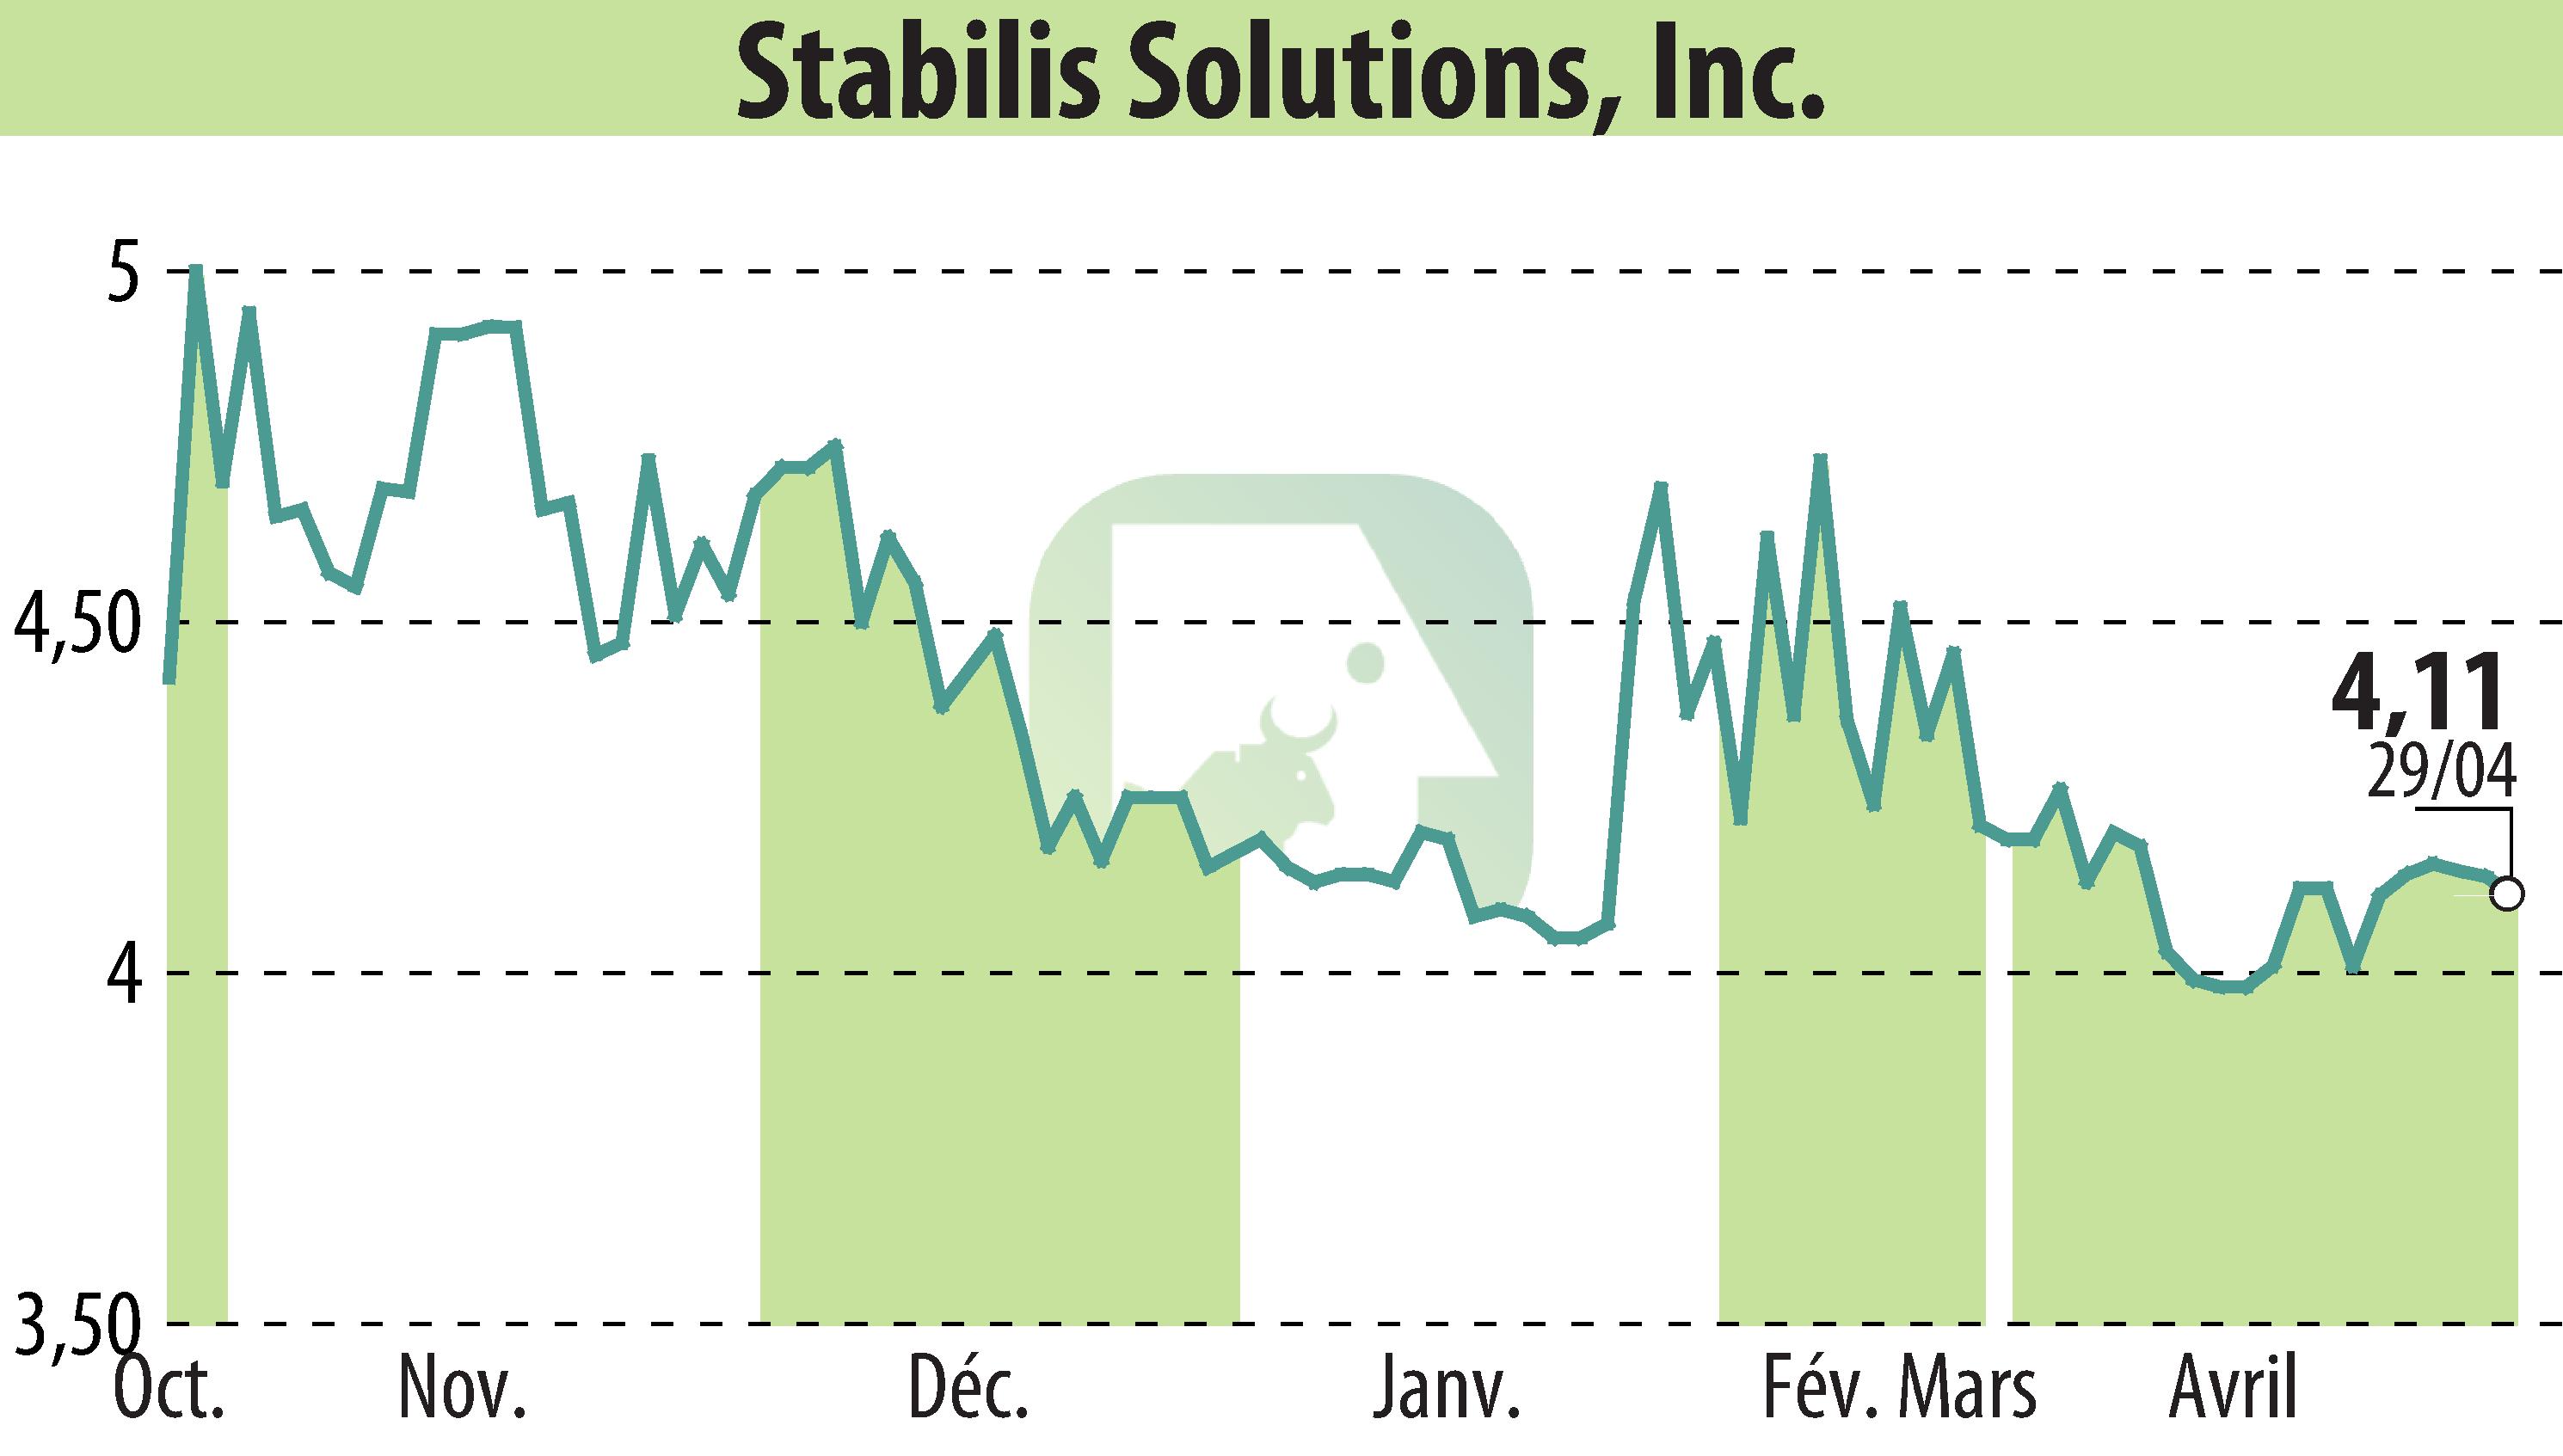 Stock price chart of Stabilis Solutions (EBR:SLNG) showing fluctuations.